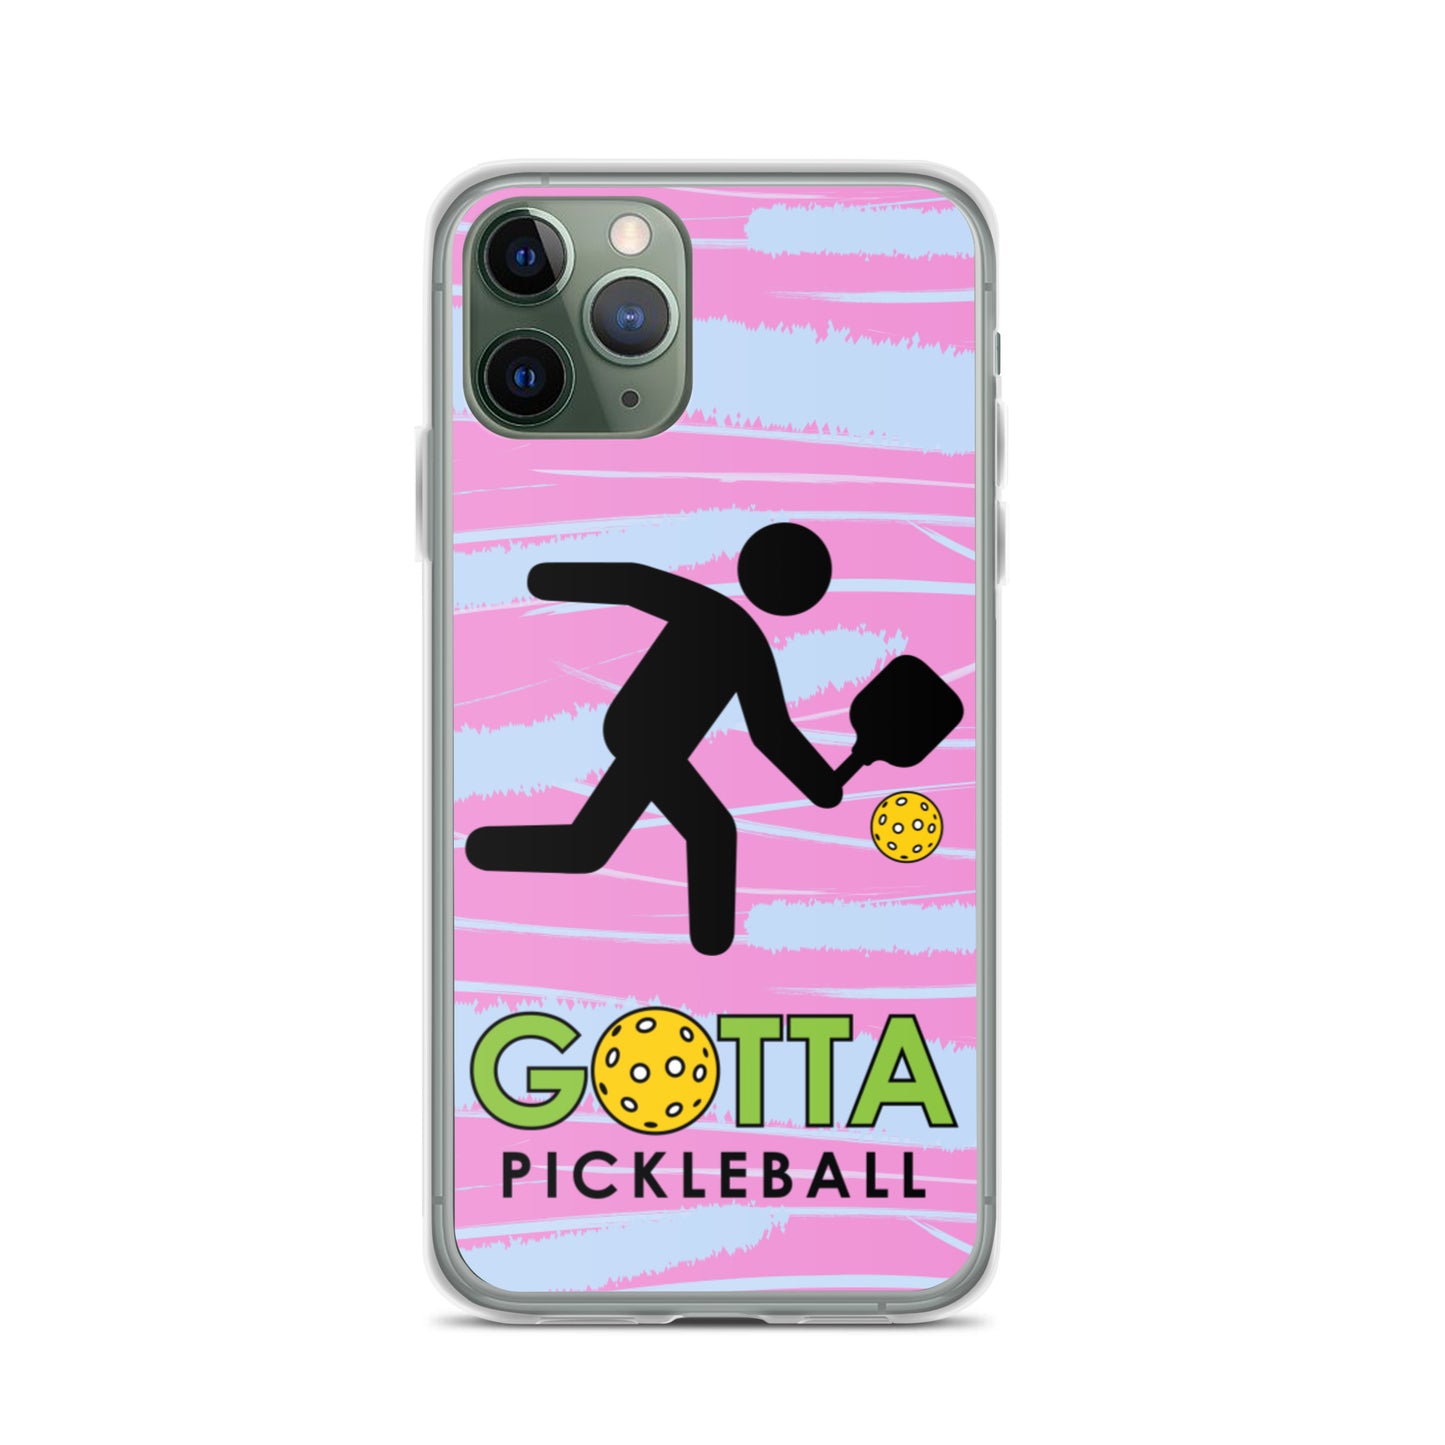 iPhone Case: GOTTA PICKLEBALL WITH OUR MASCOT OZZIE PINK & BLUE